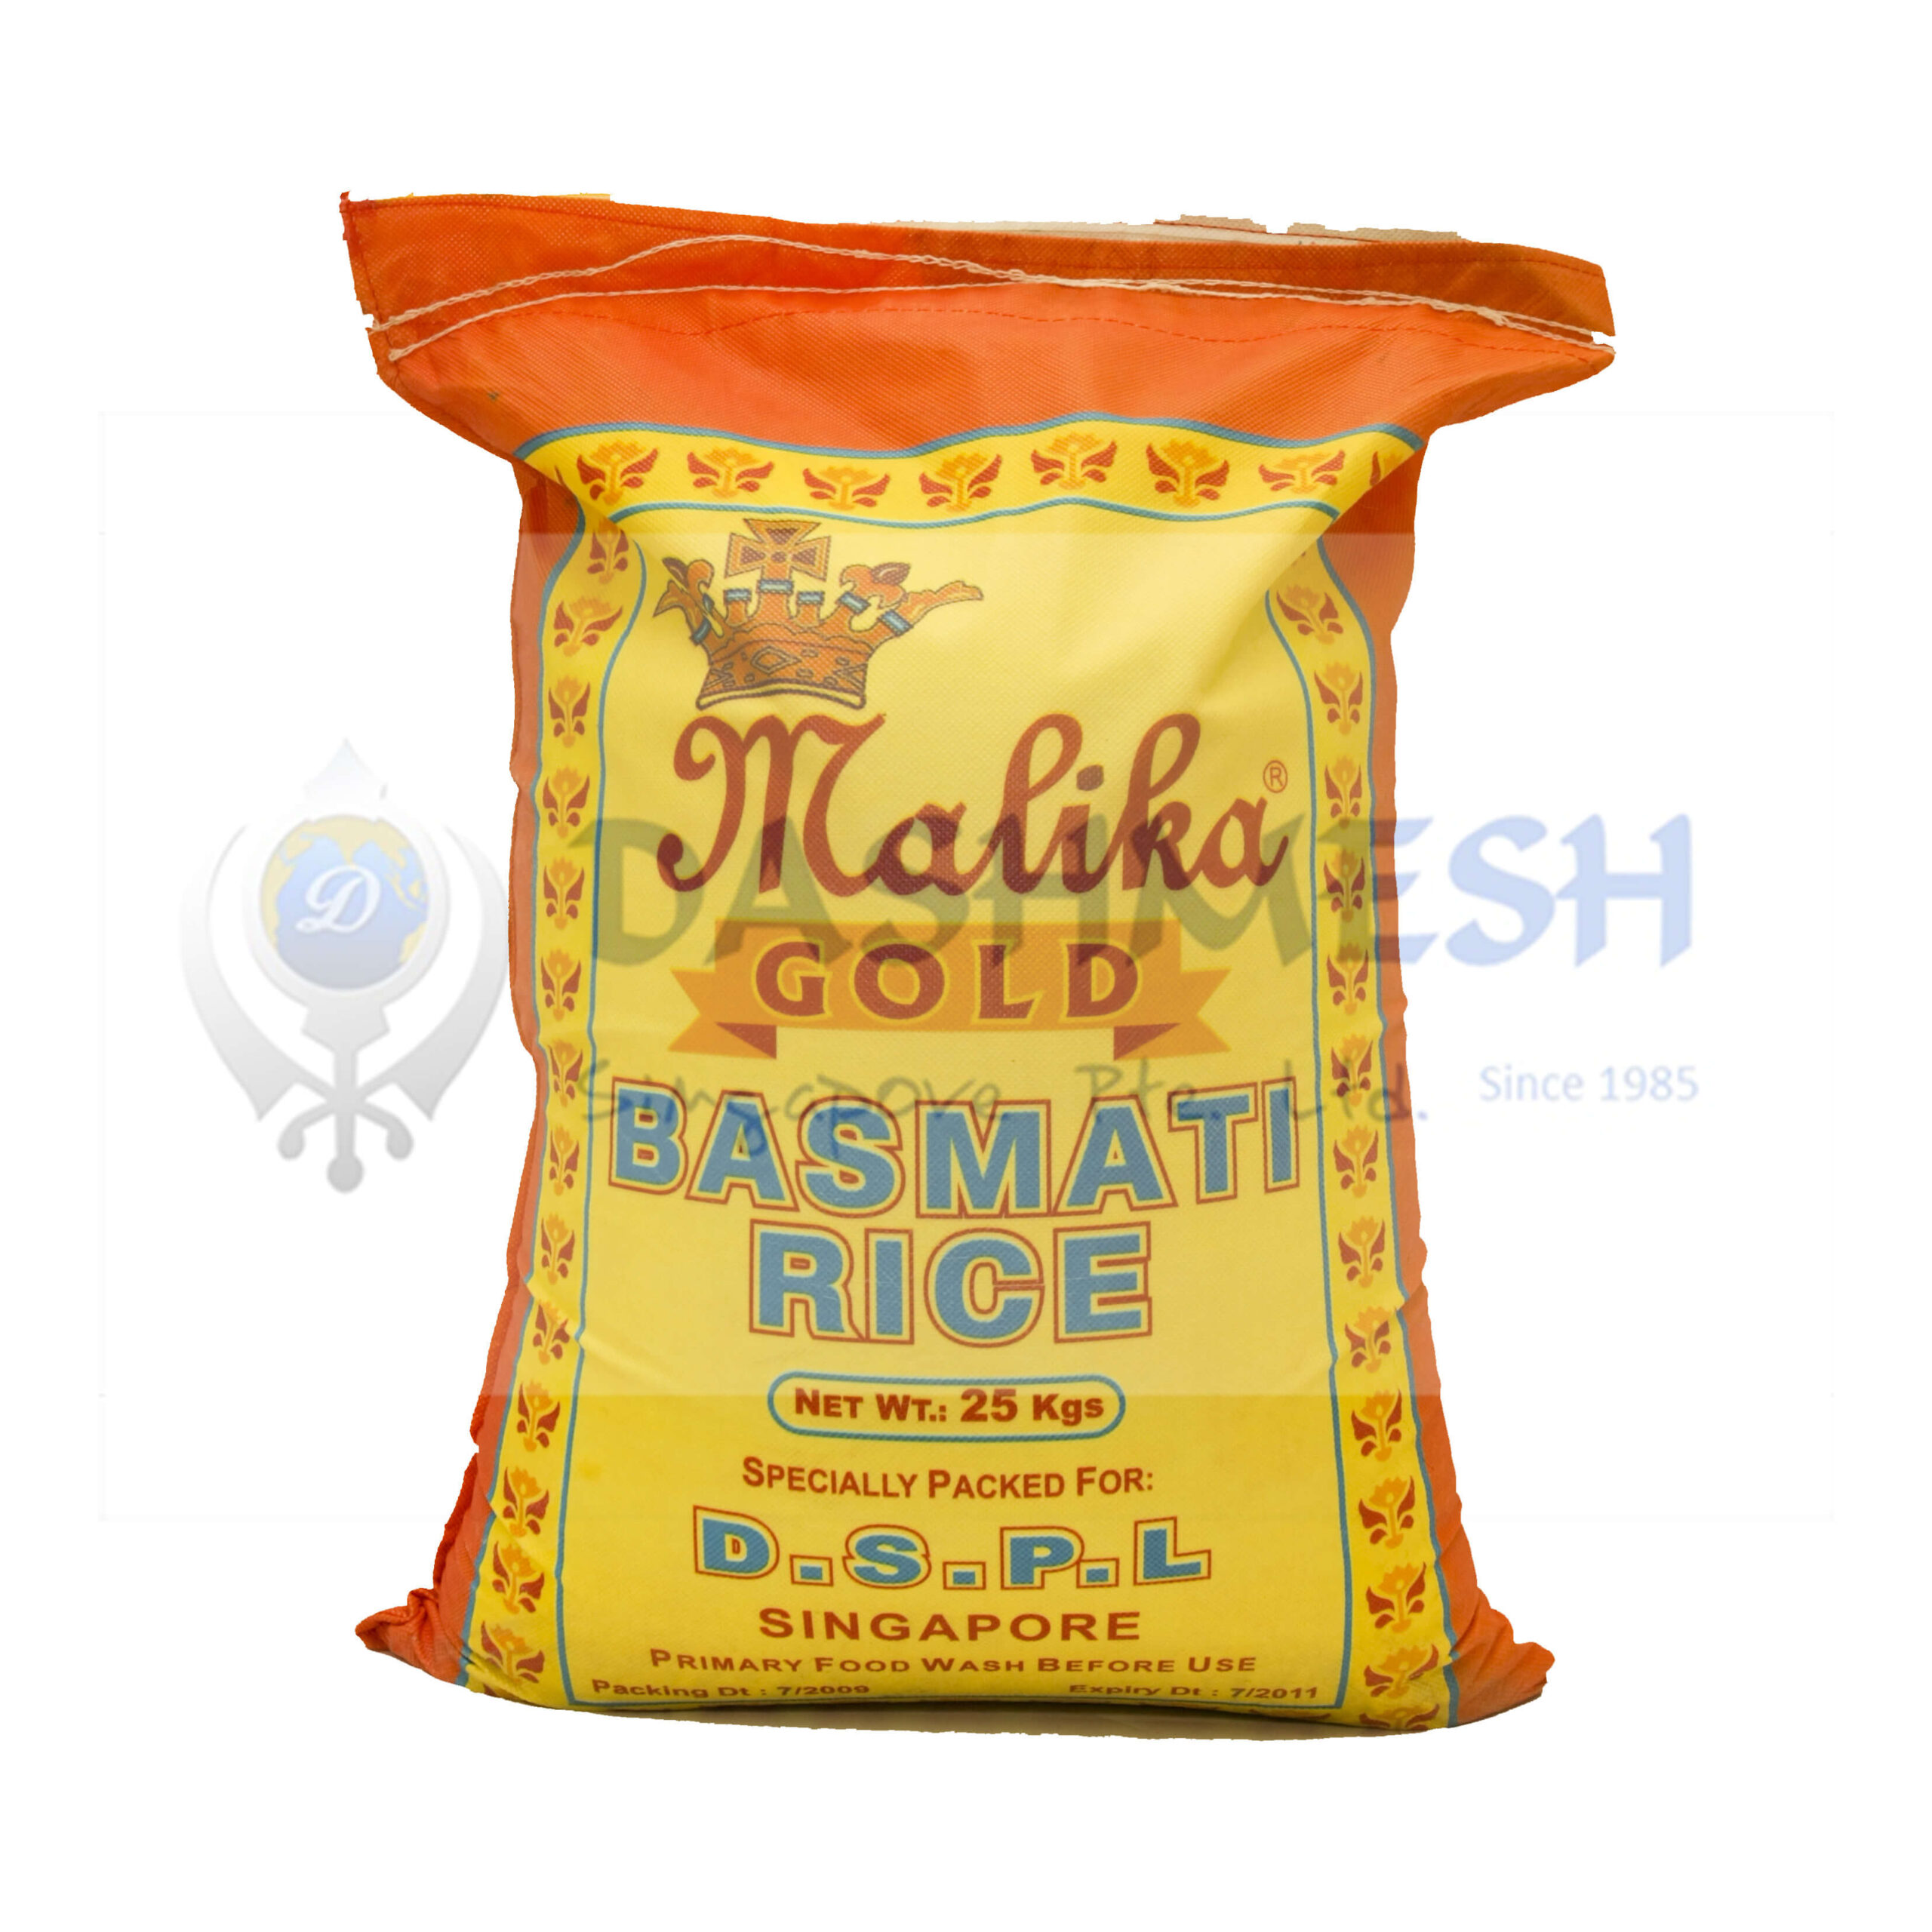 Basmati Rice In A Miniature Burlap Bag Isolated On White Stock Photo,  Picture and Royalty Free Image. Image 14951563.